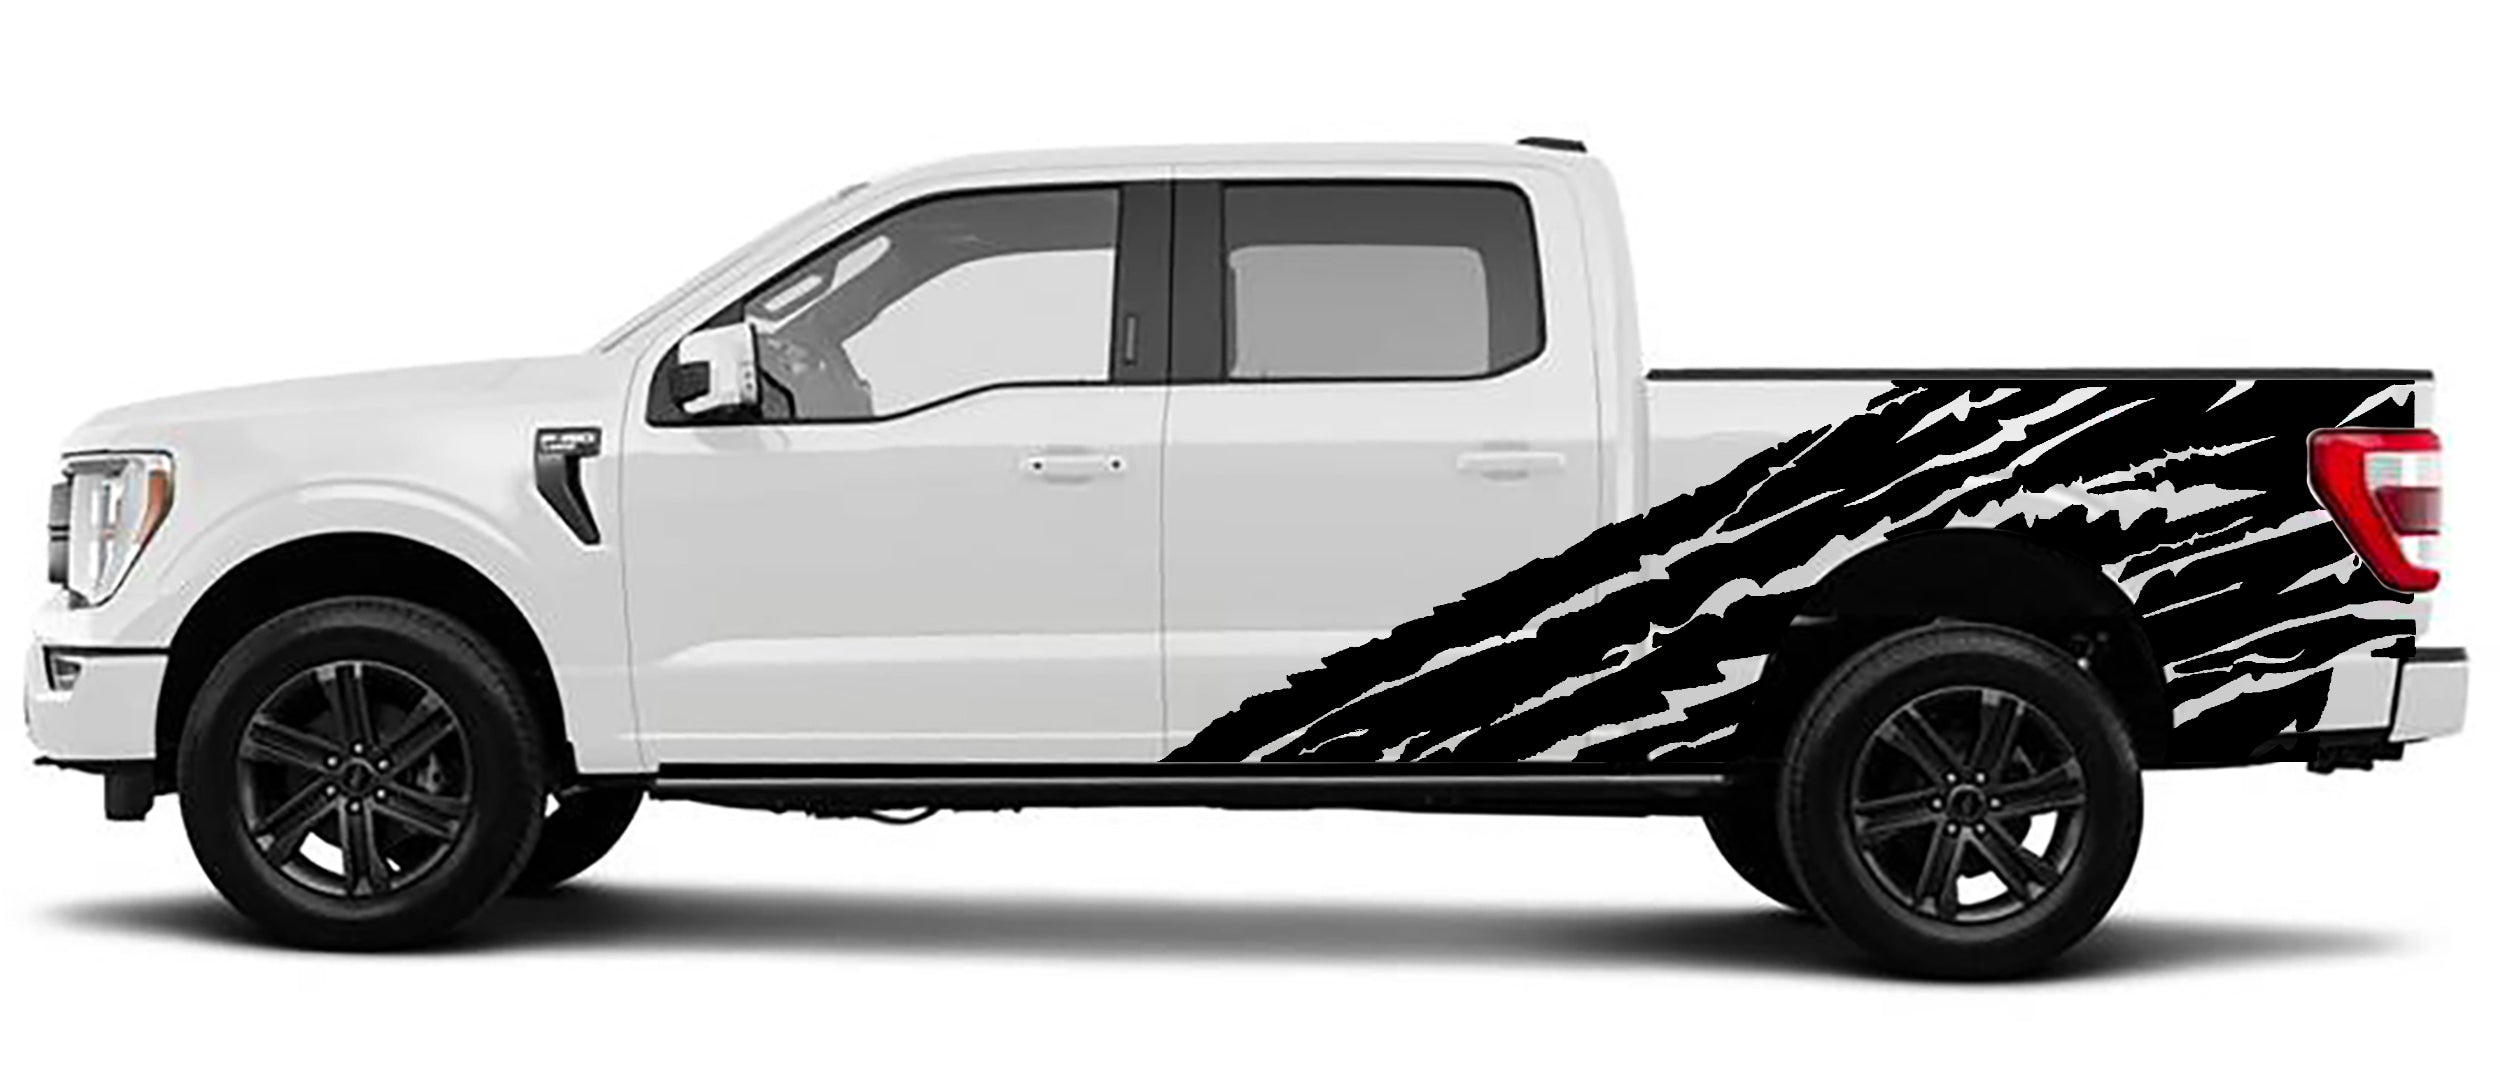 Ford F-150 Half Side Torn Side Decals (Pair) : Vinyl Graphics Kit Fits (2021-2023)